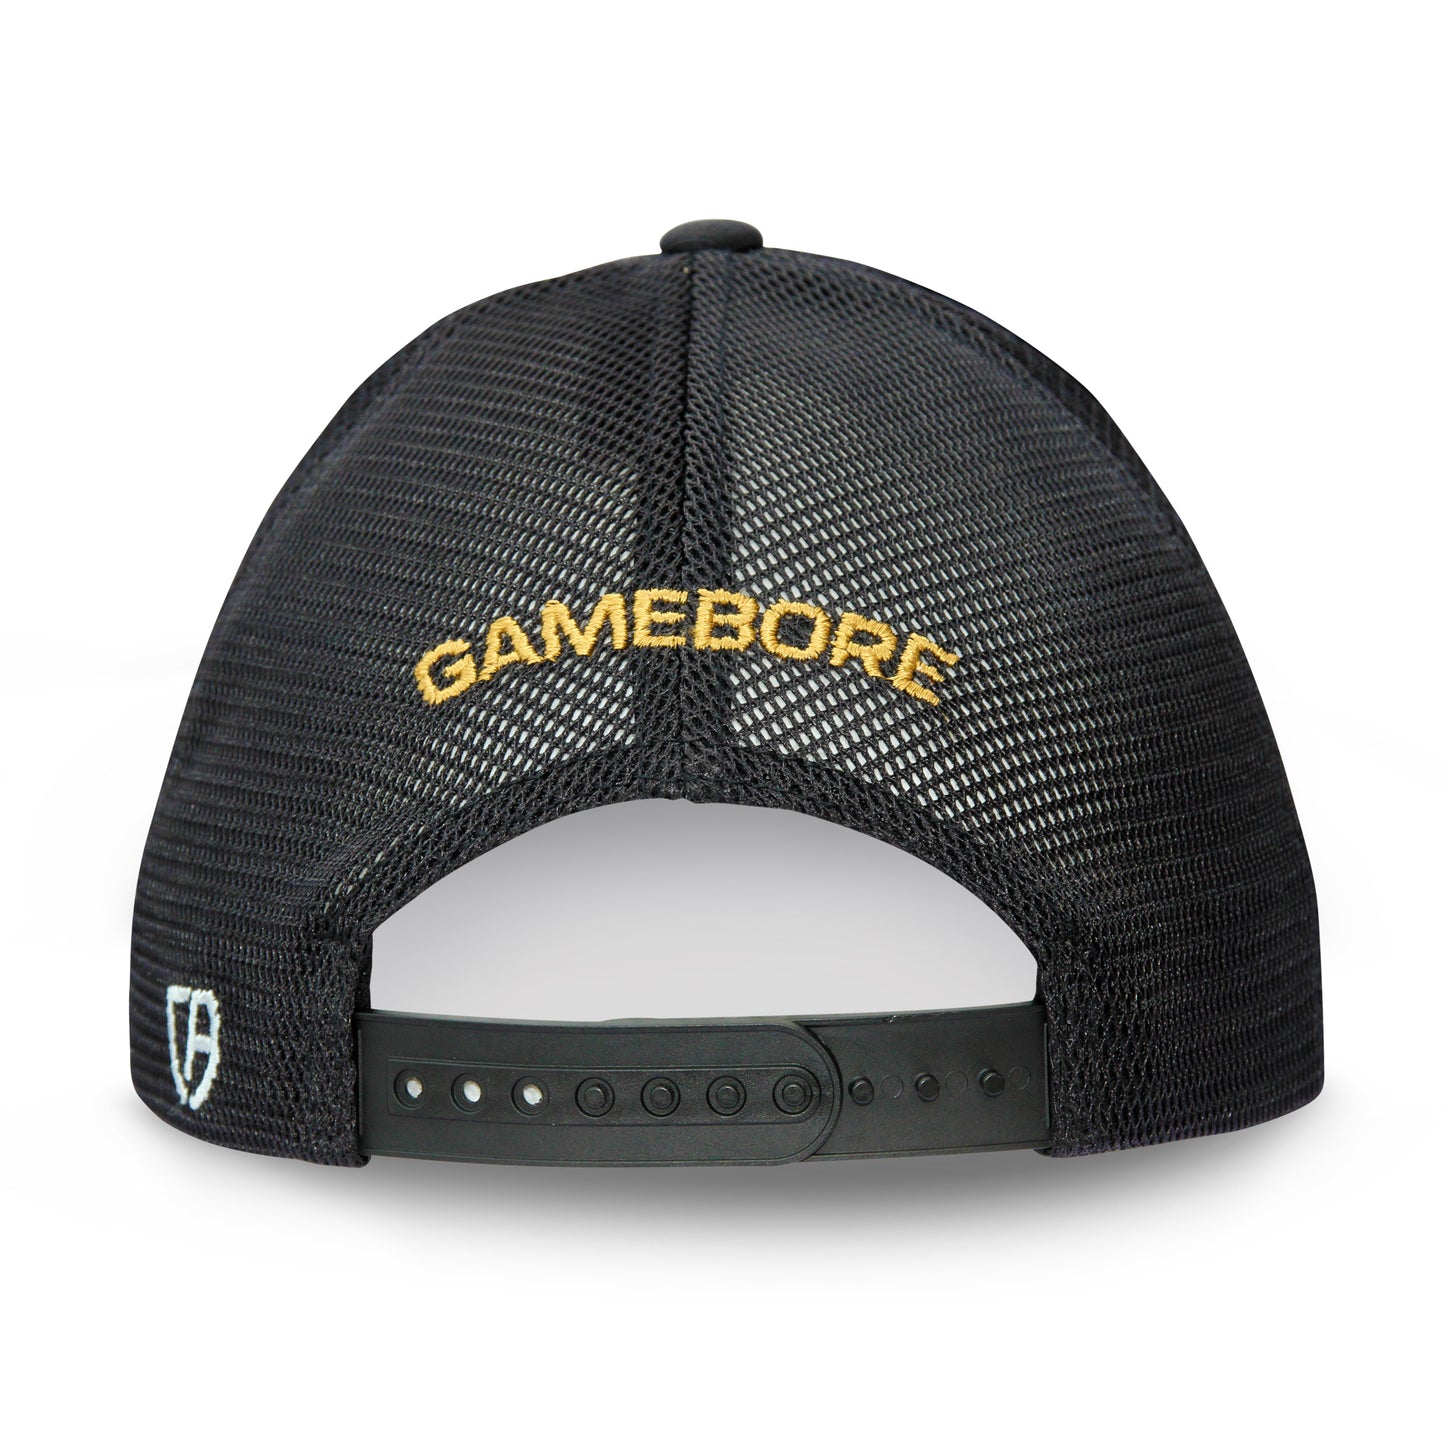 Performance Cap by Gamebore - Black